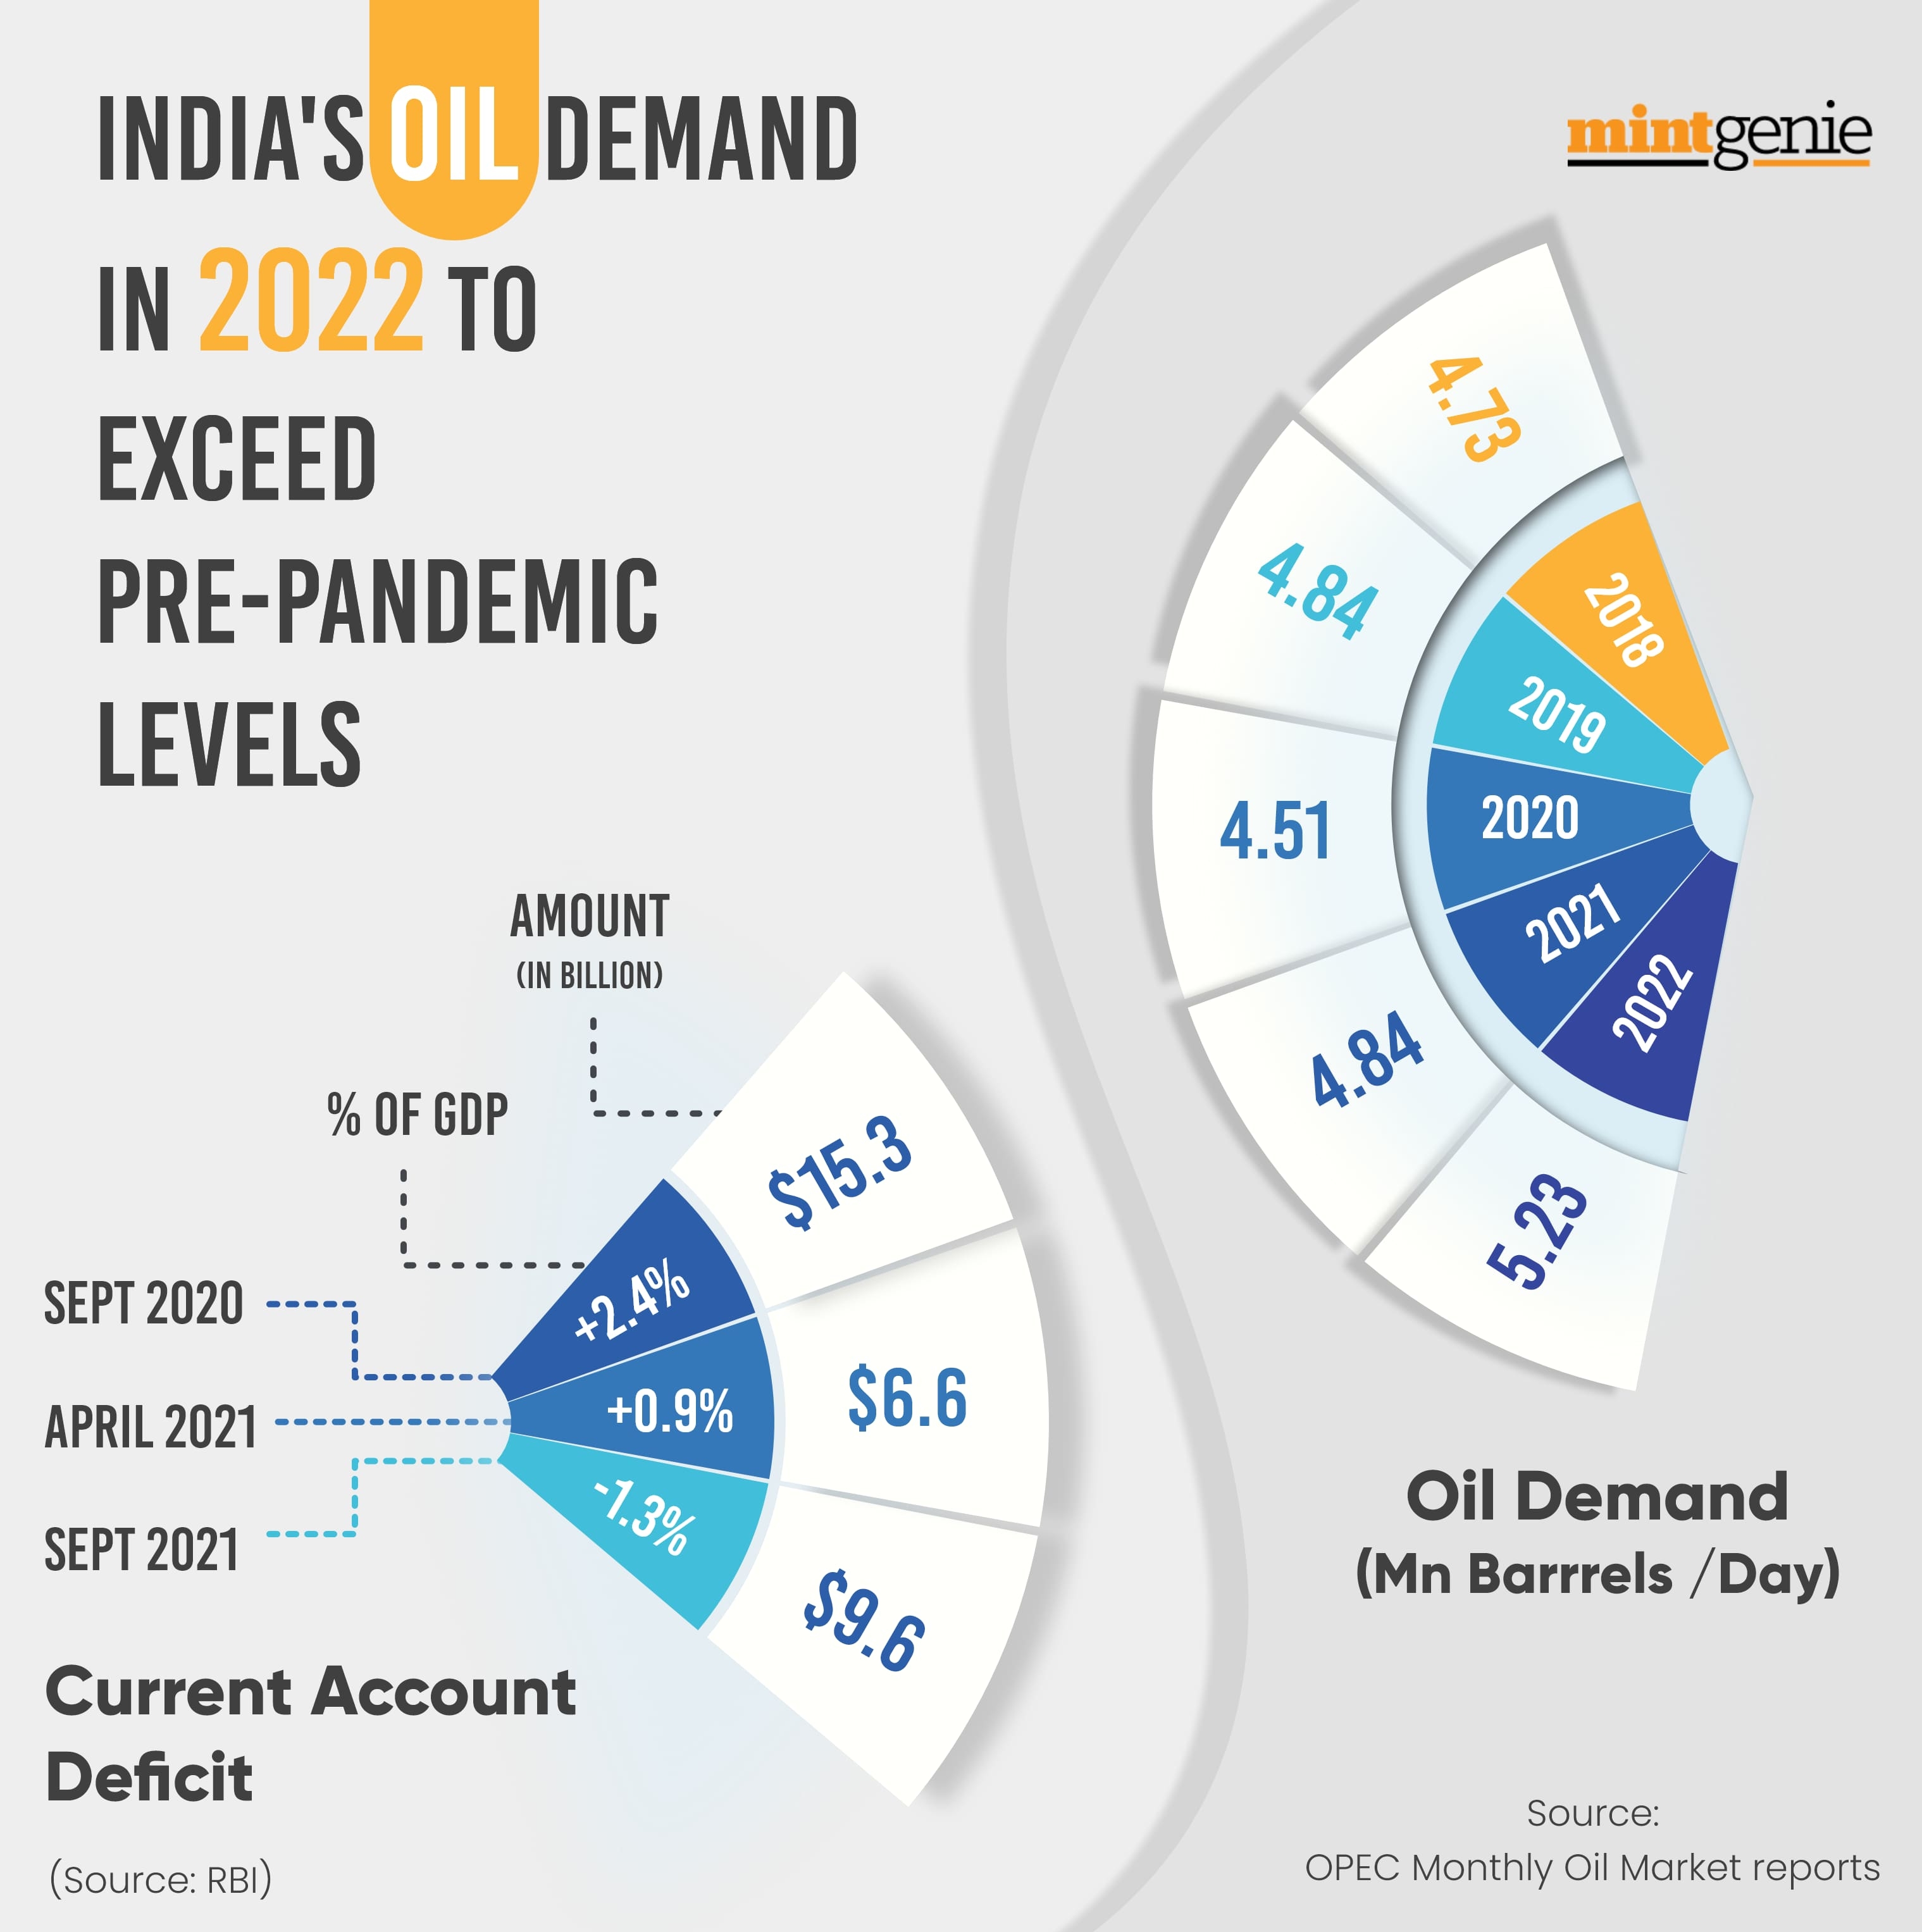 India's oil demand in 2022 to exceed pre-pandemic levels